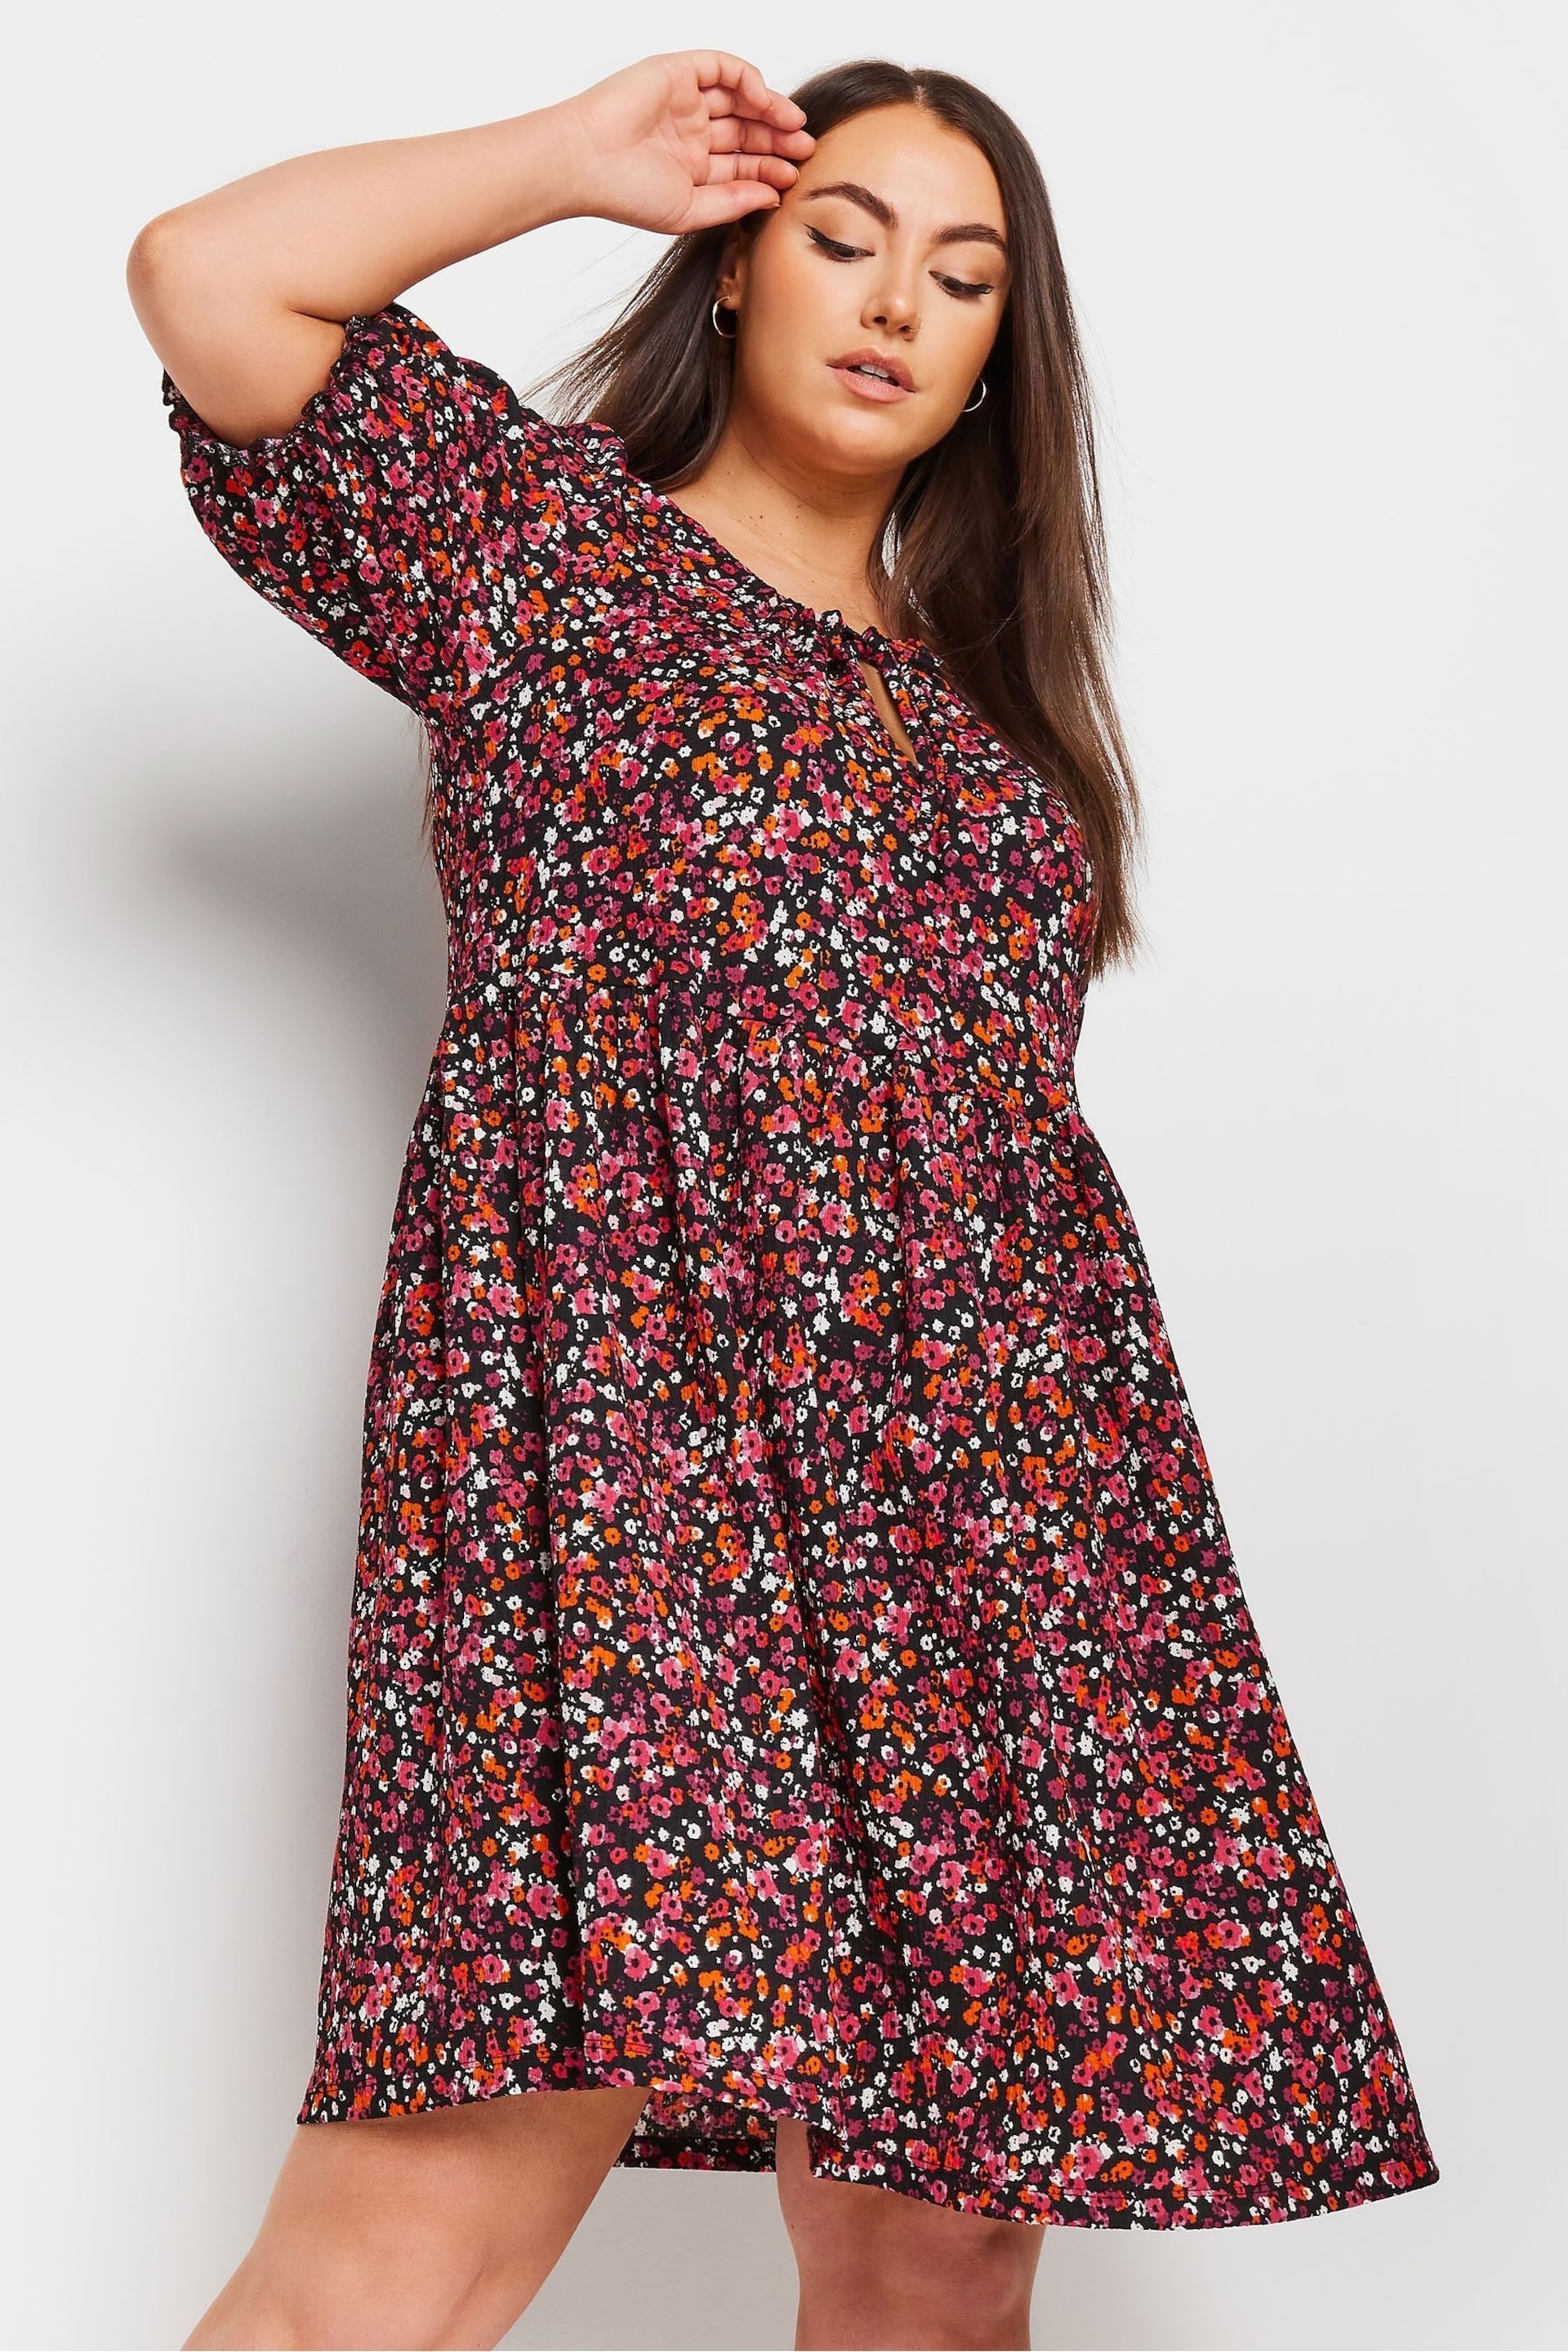 Yours Curve Black Floral Print Textured Mini Dress - Image 1 of 5